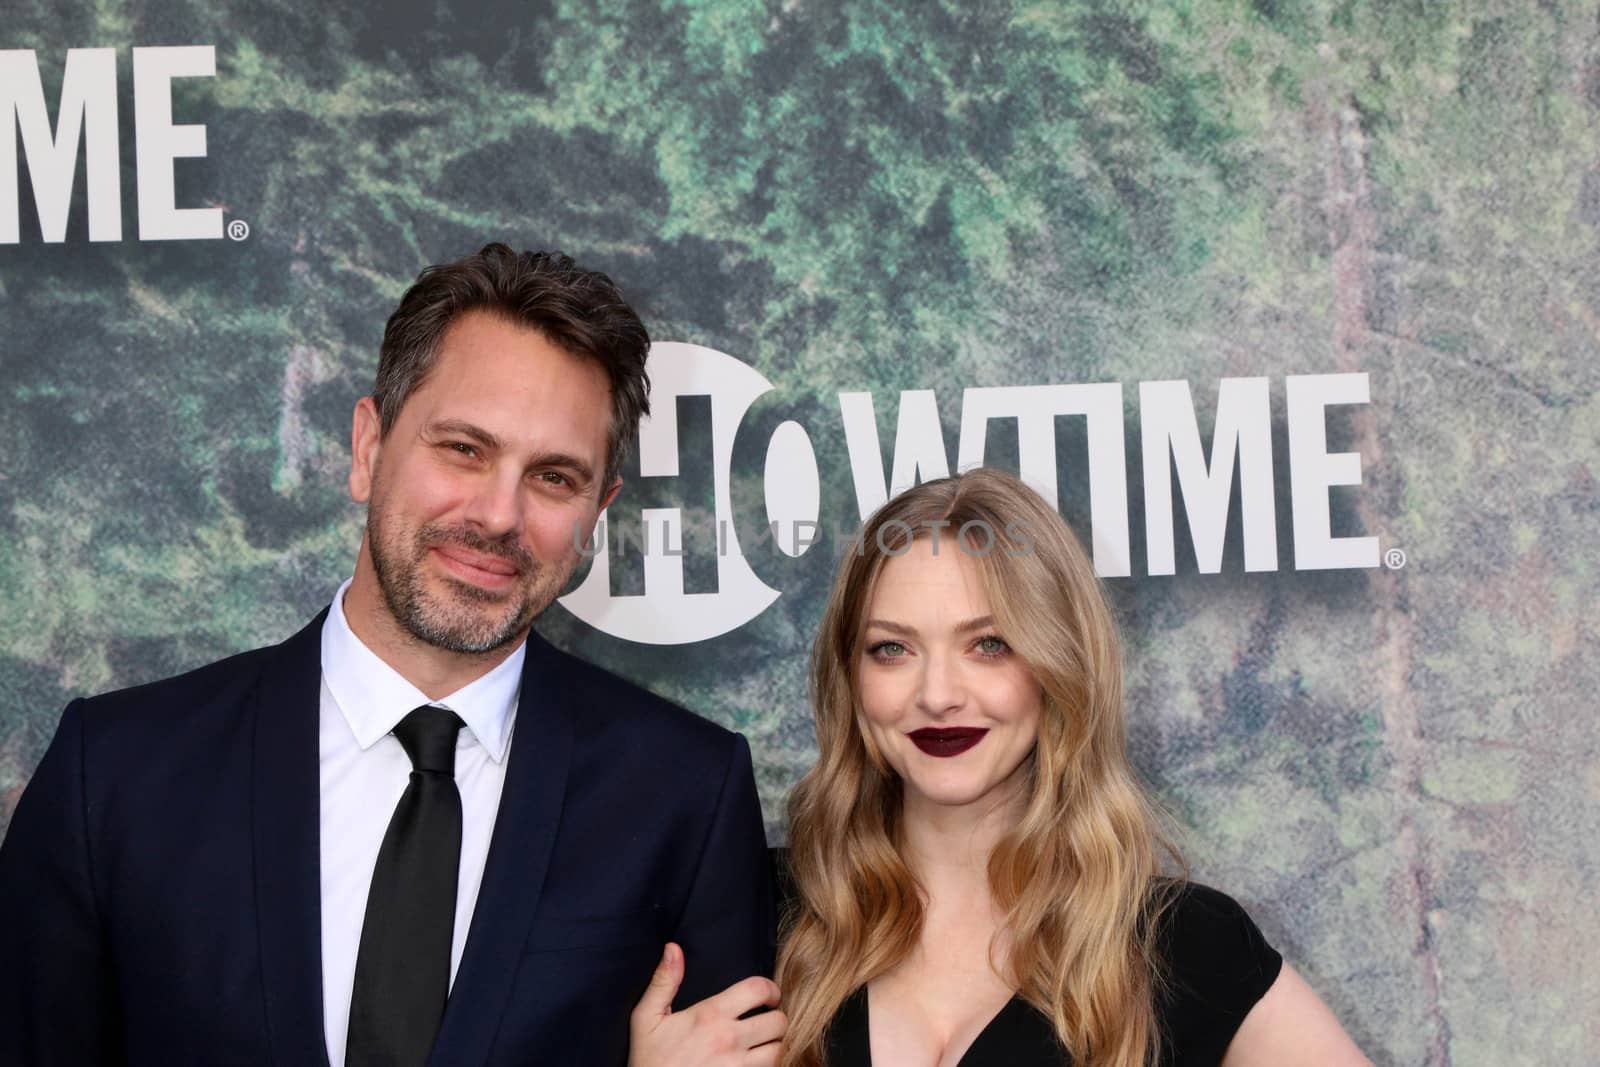 Thomas Sadoski, Amanda Seyfried
at the "Twin Peaks" Premiere Screening, The Theater at Ace Hotel, Los Angeles, CA 05-19-17/ImageCollect by ImageCollect